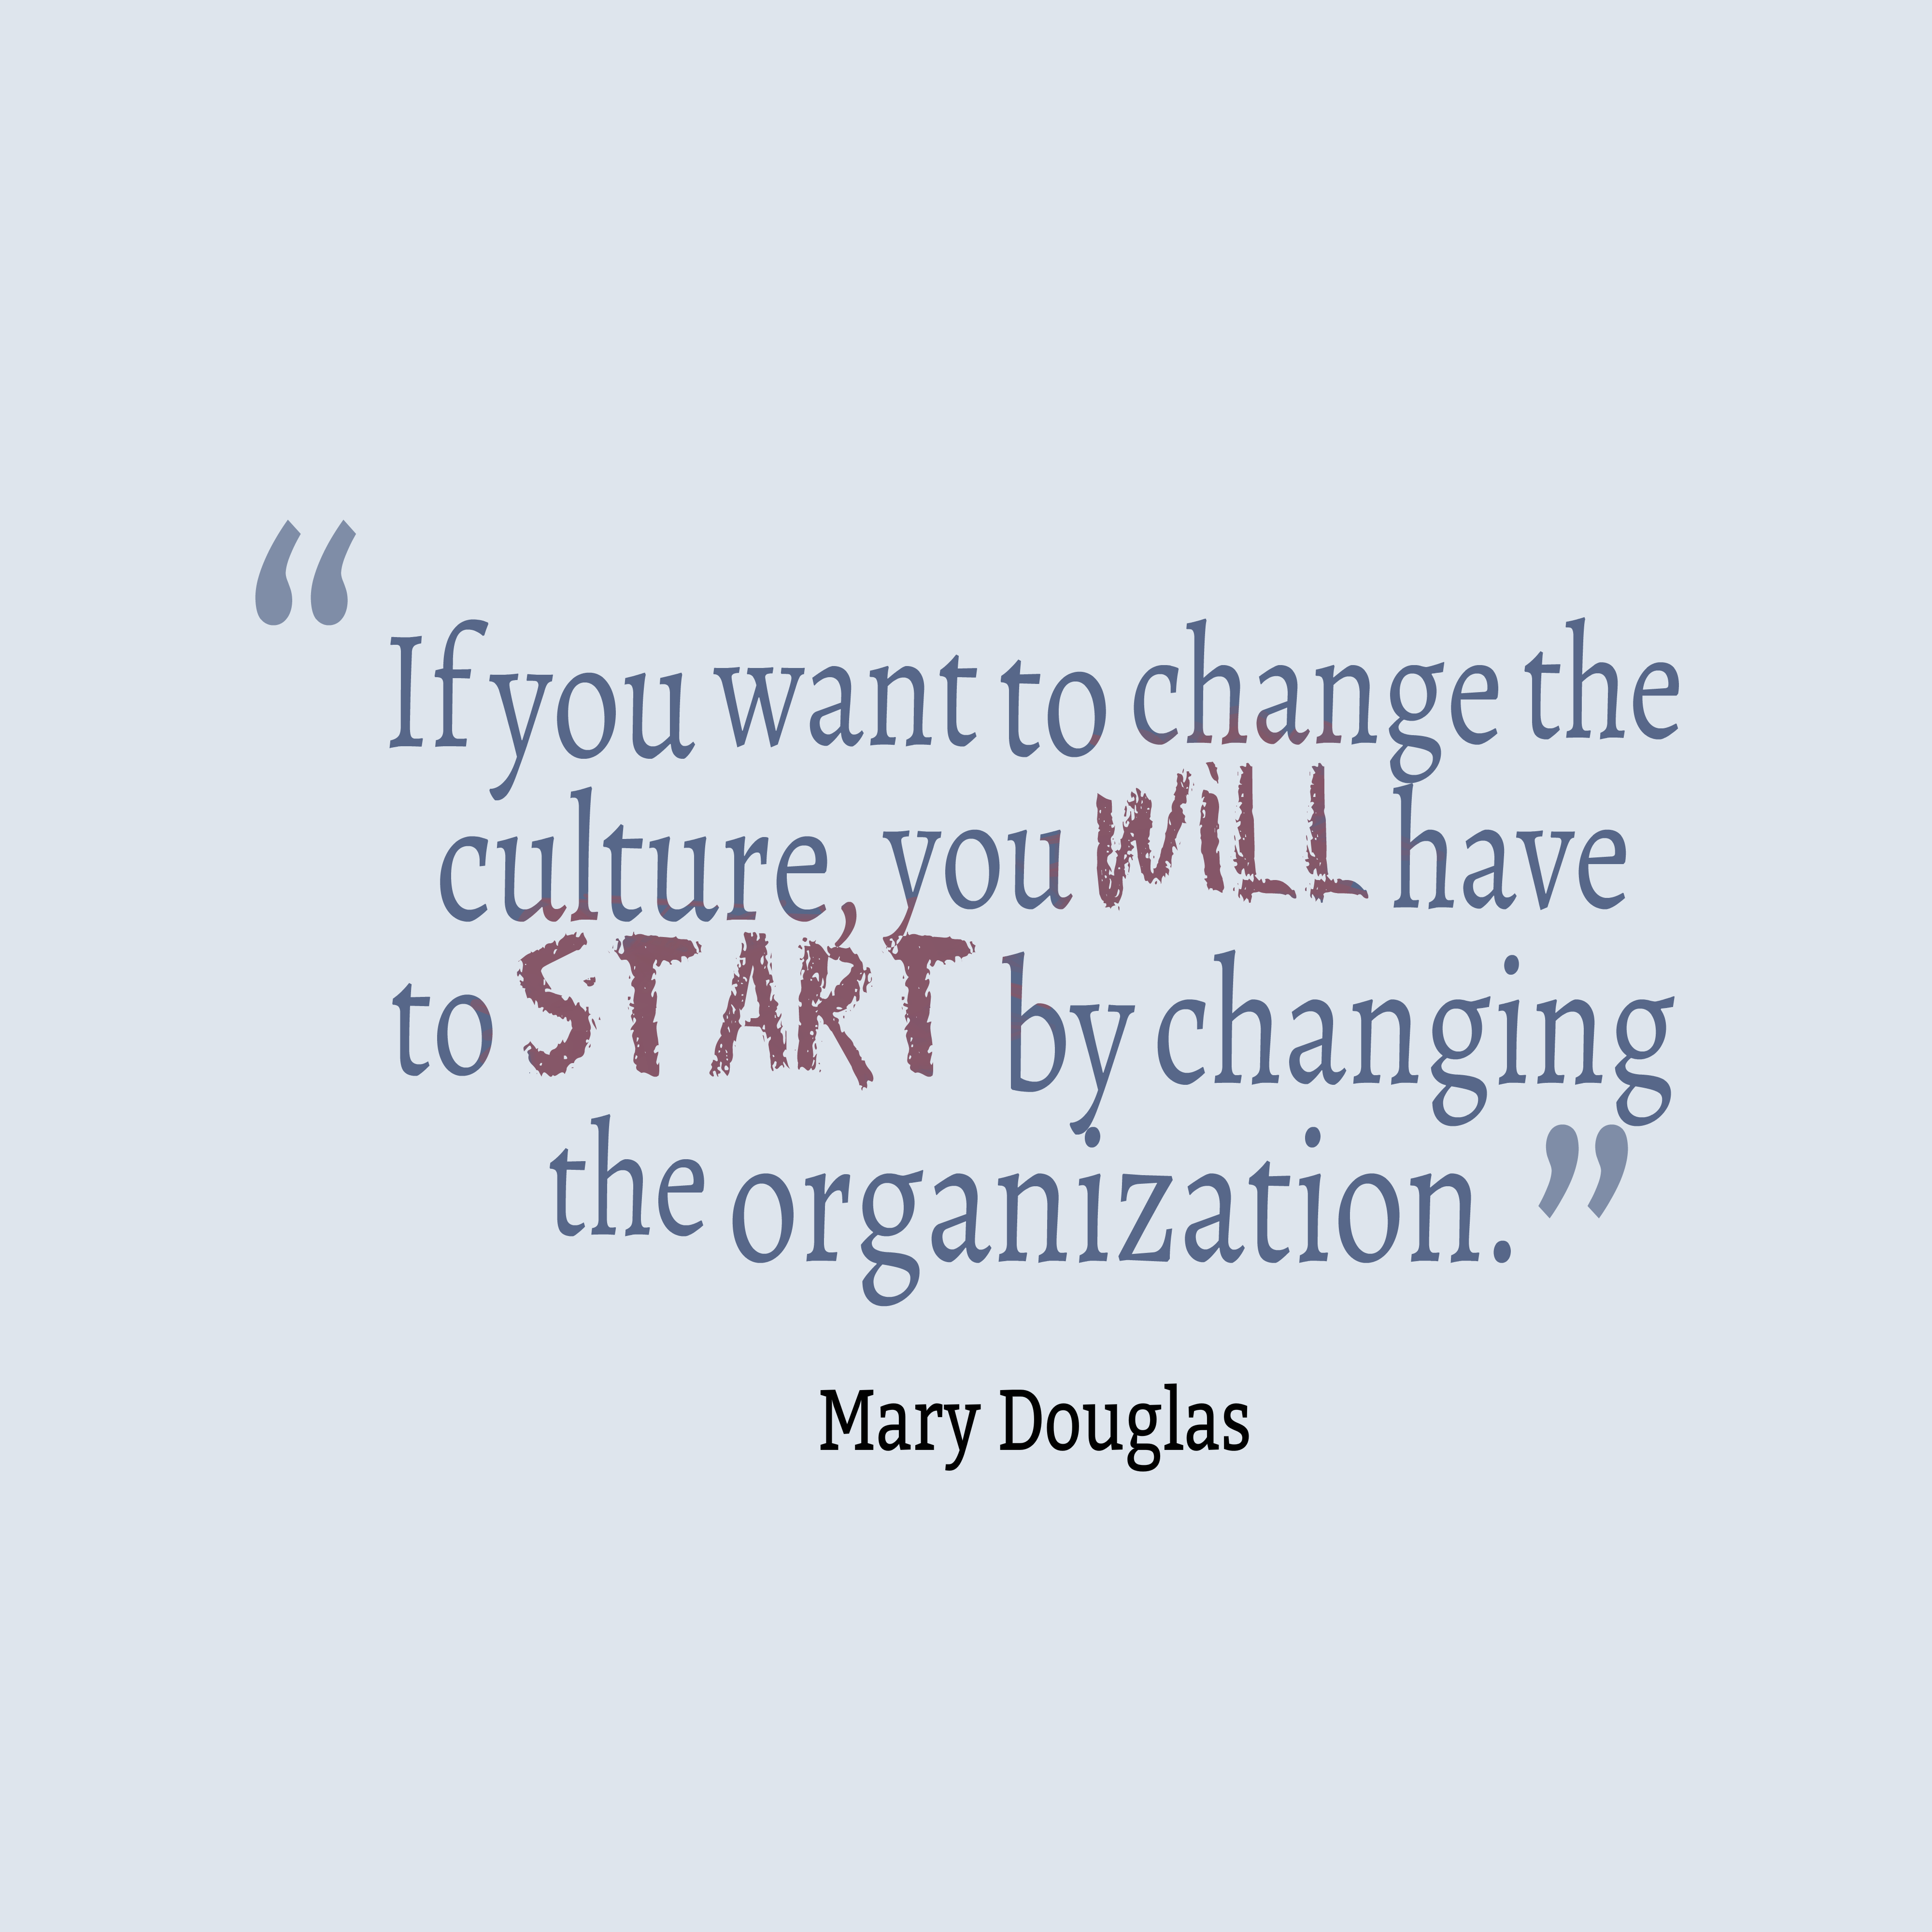 If You Want To Change The Culture You Will Have To Start By Changing The Organization. Mary Douglas